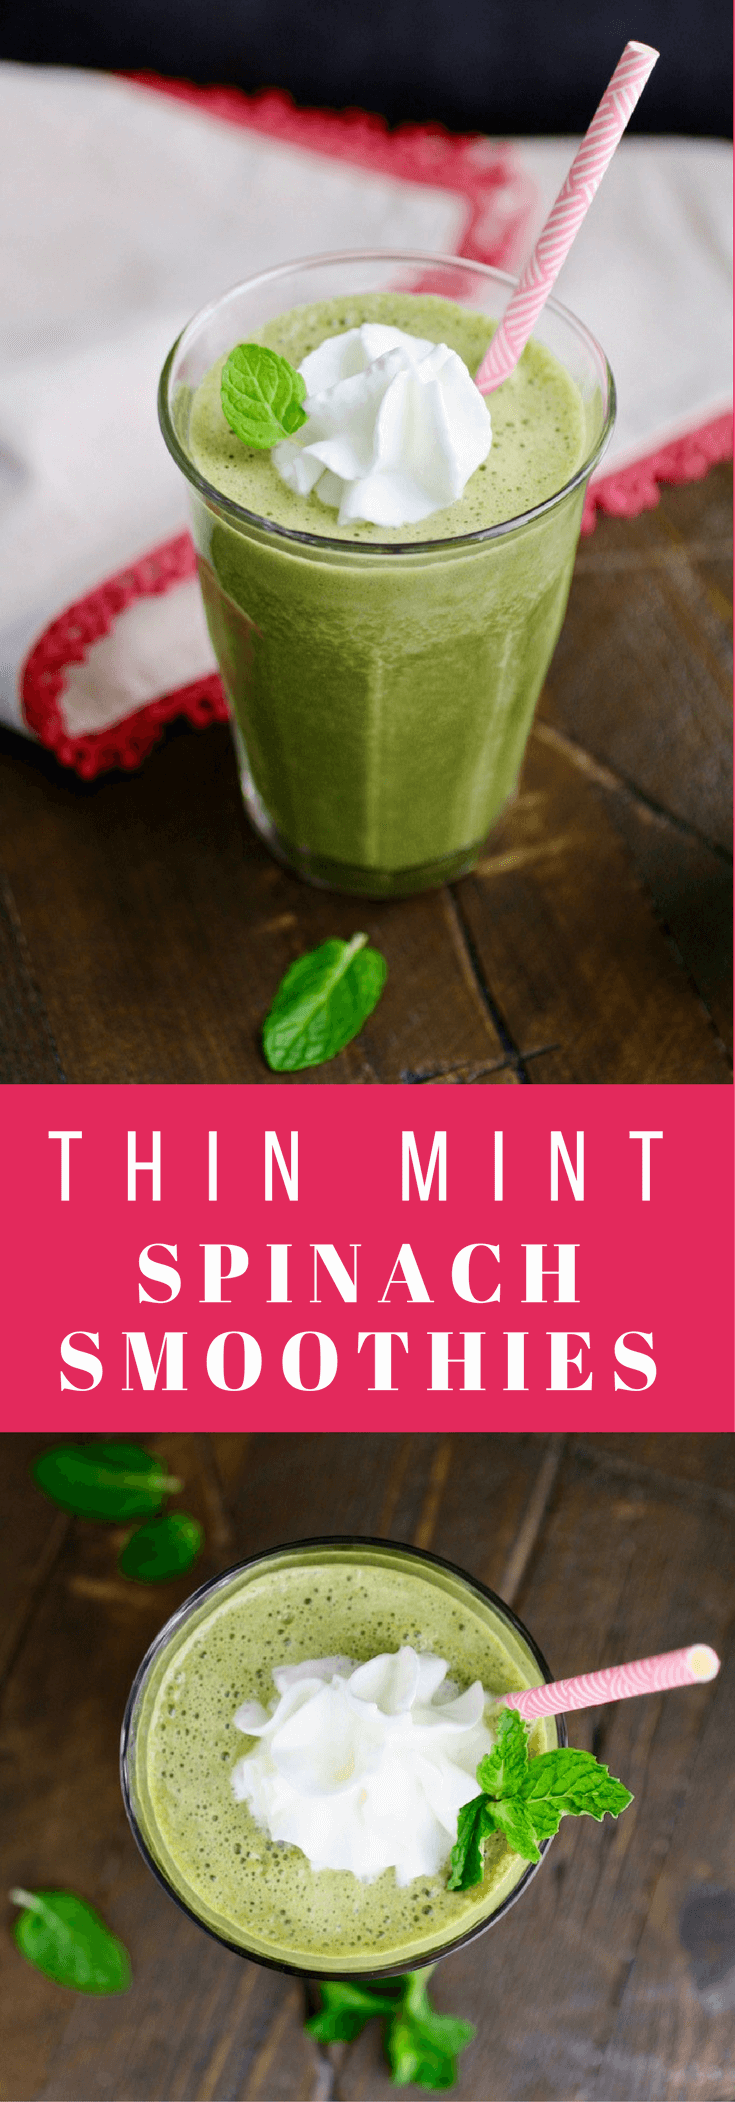 Enjoy these Thin Mint Spinach Smoothies for a fabulous treat!